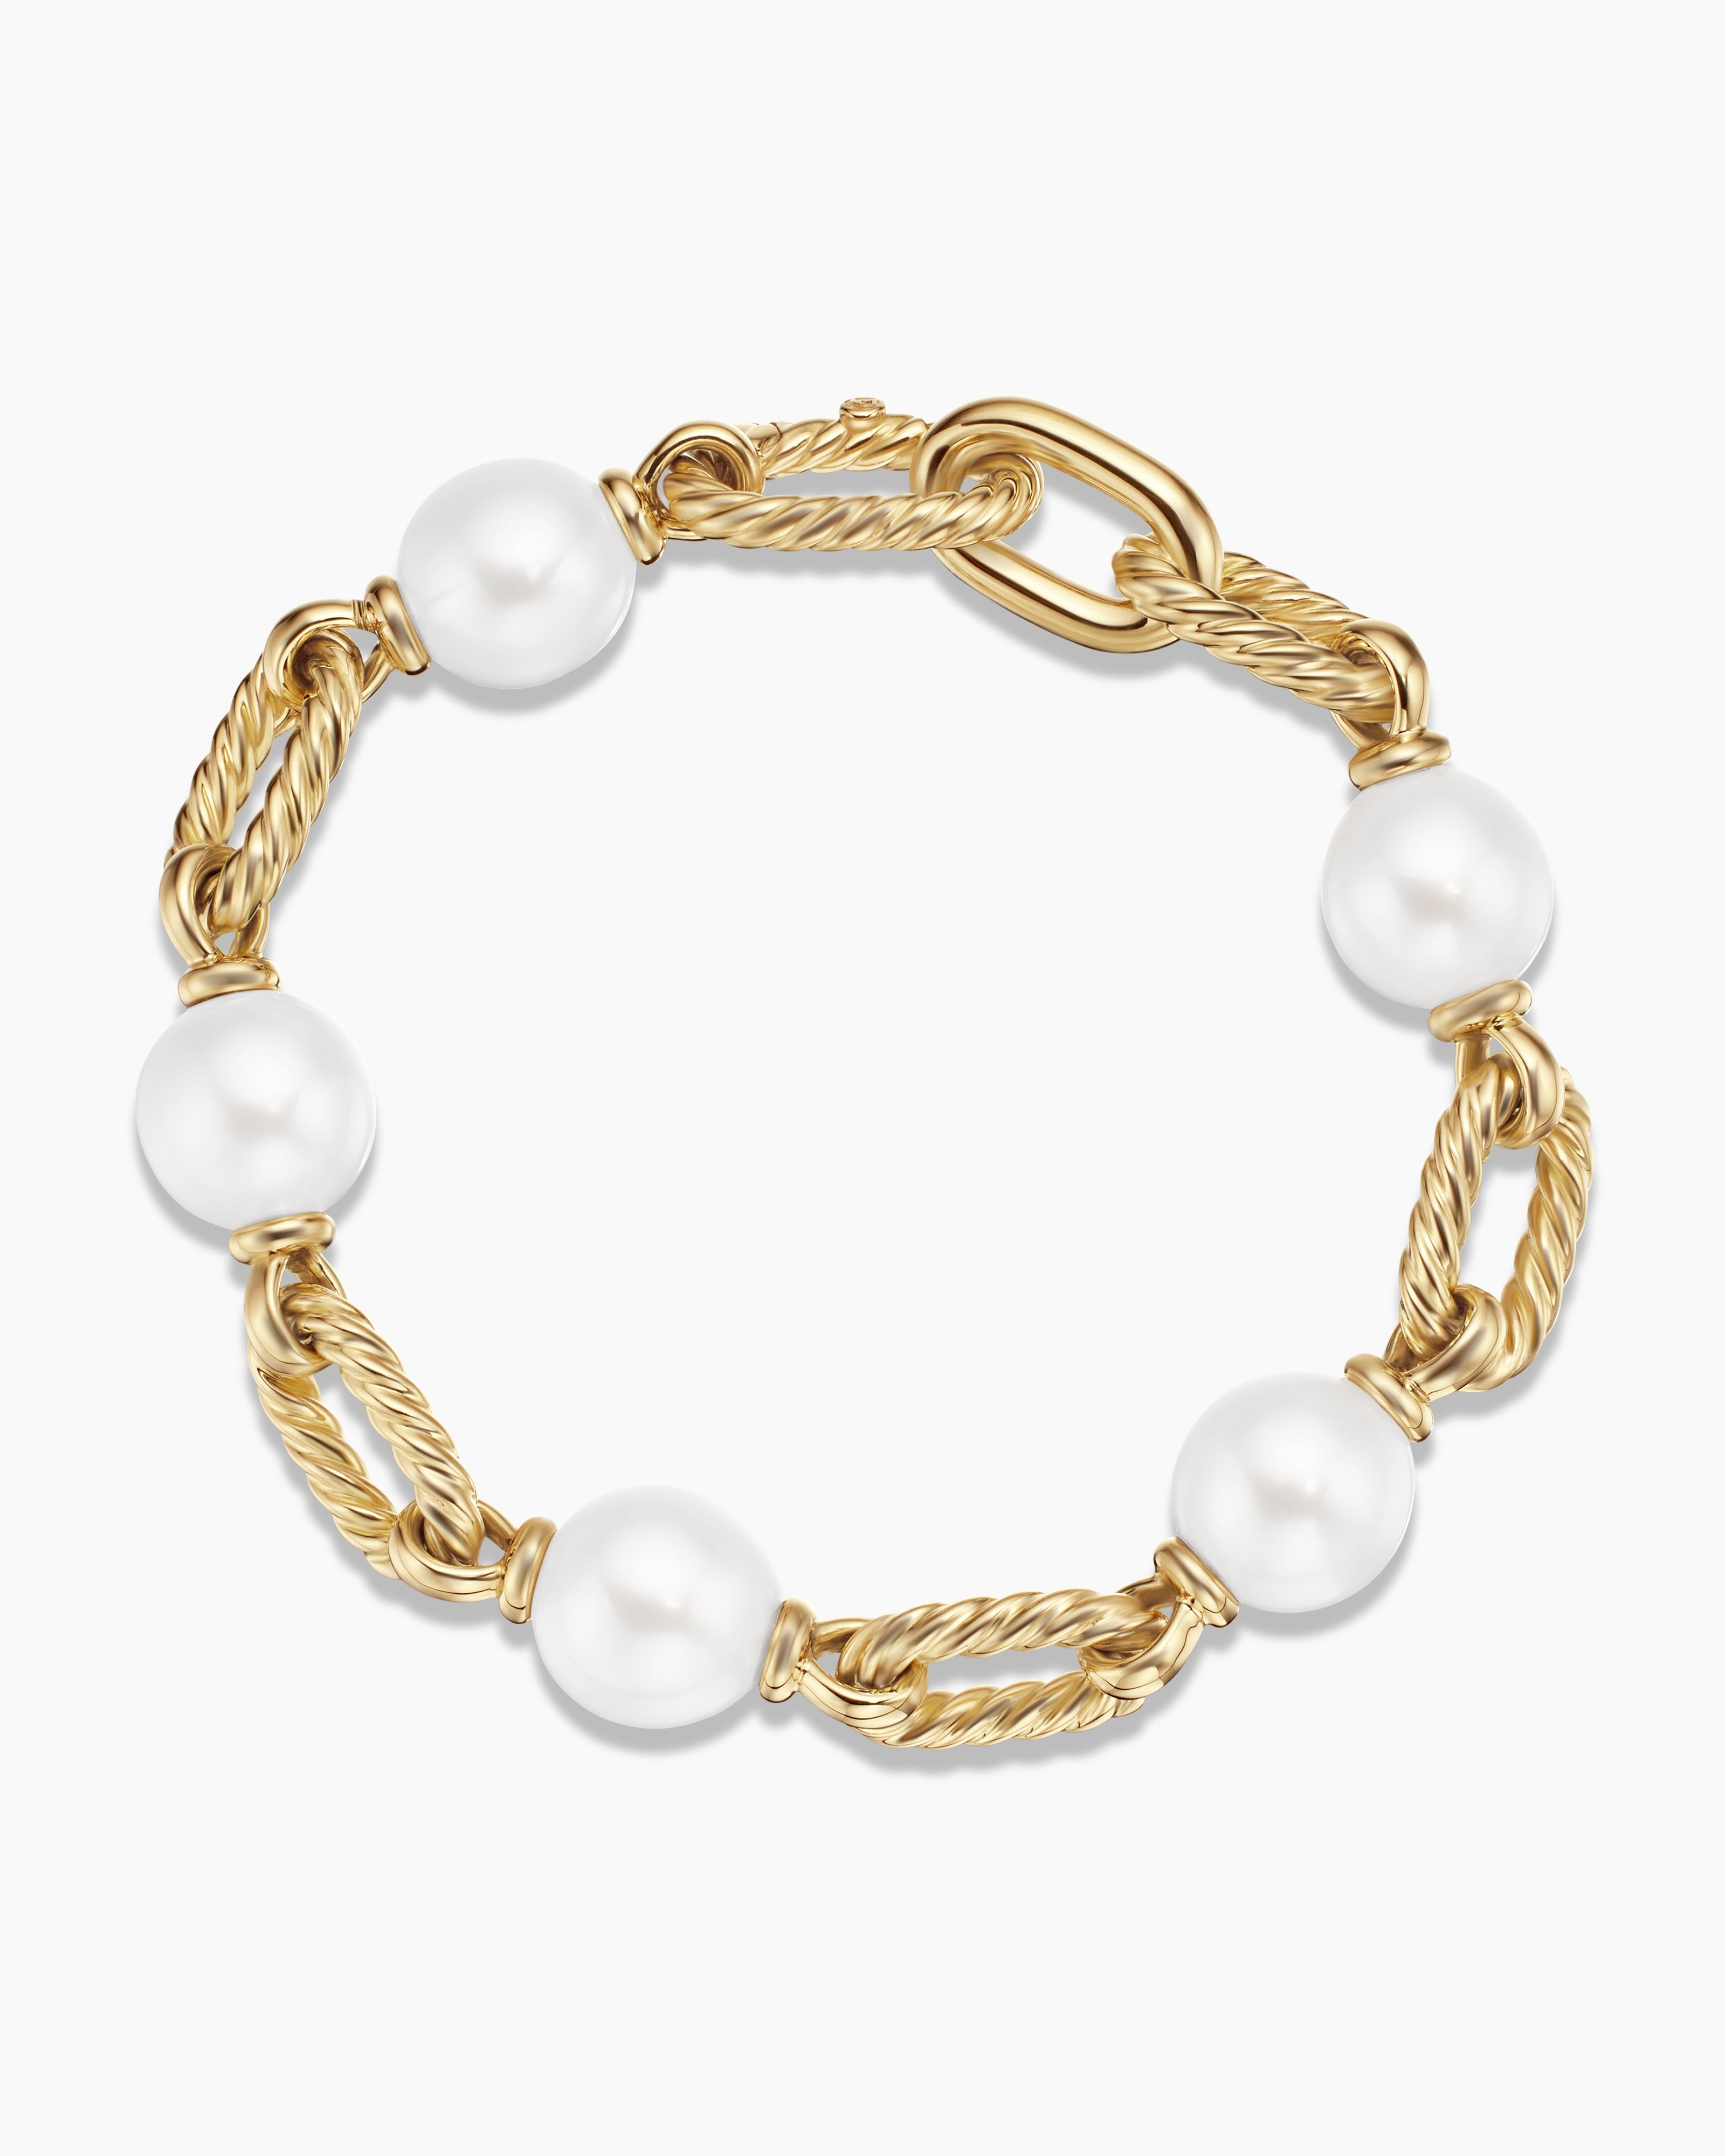 DY Madison® Pearl Chain Bracelet in 18K Yellow Gold with Pearls